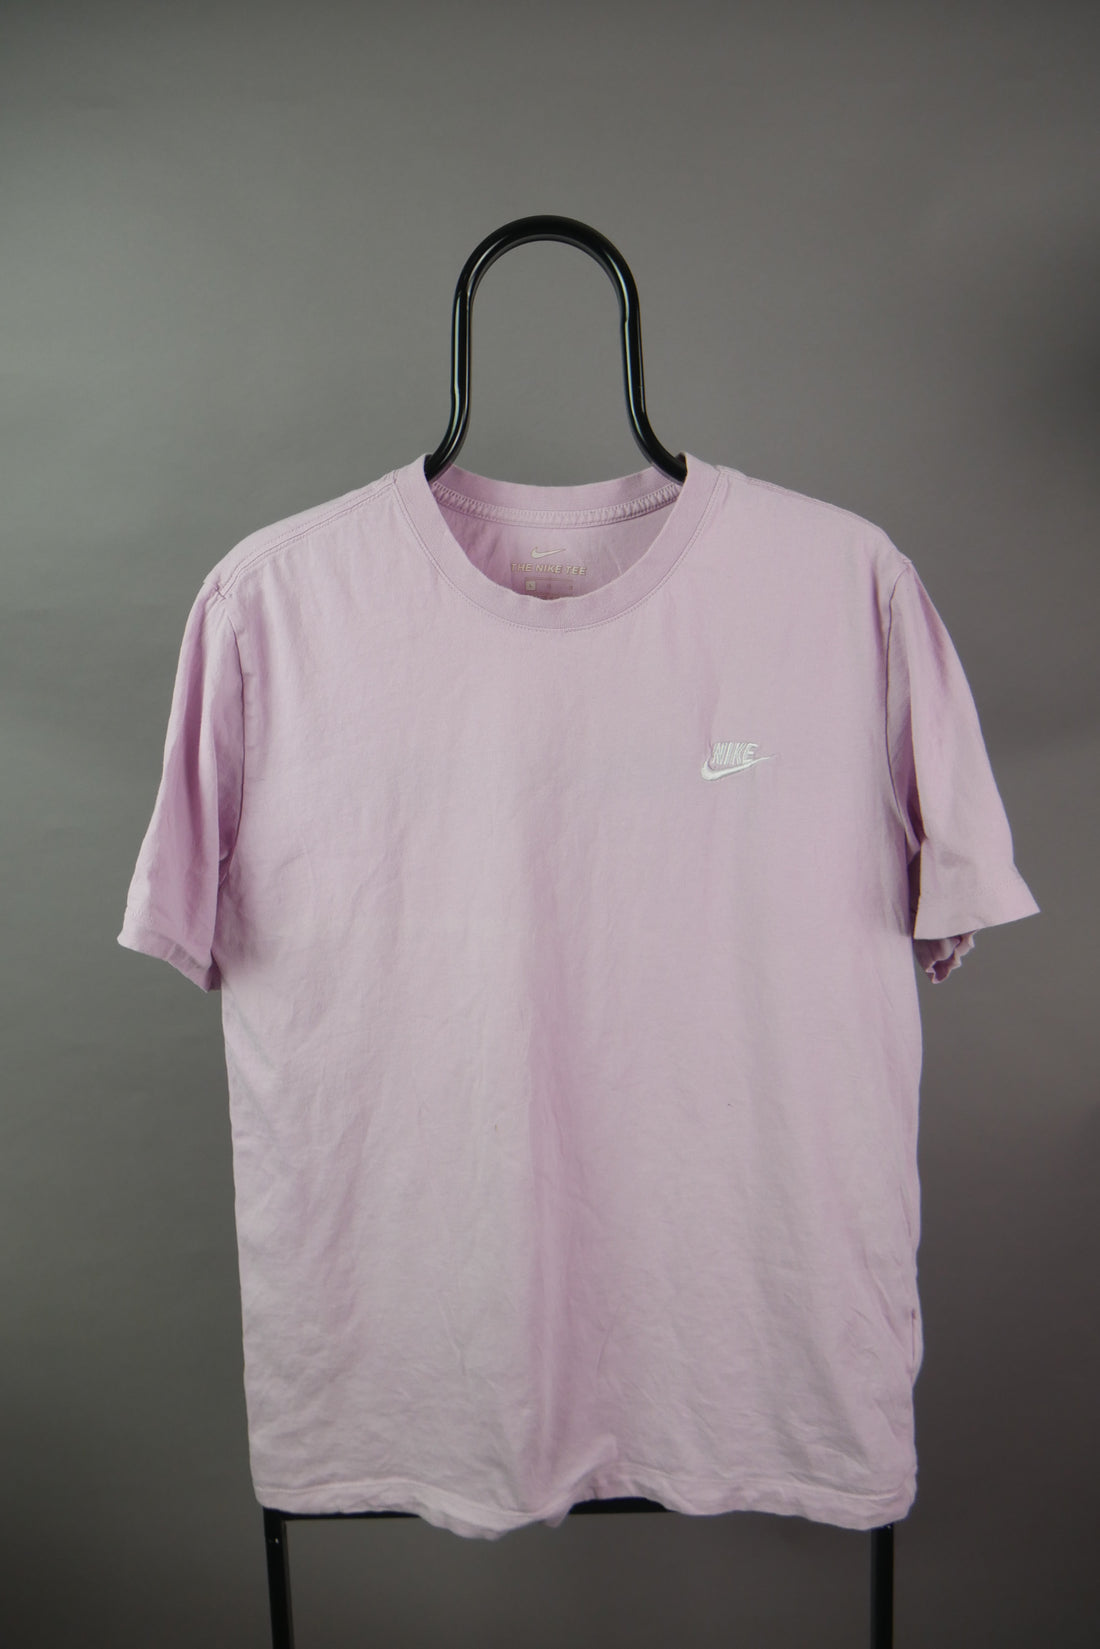 The Nike Embroidered Logo T-Shirt (L)